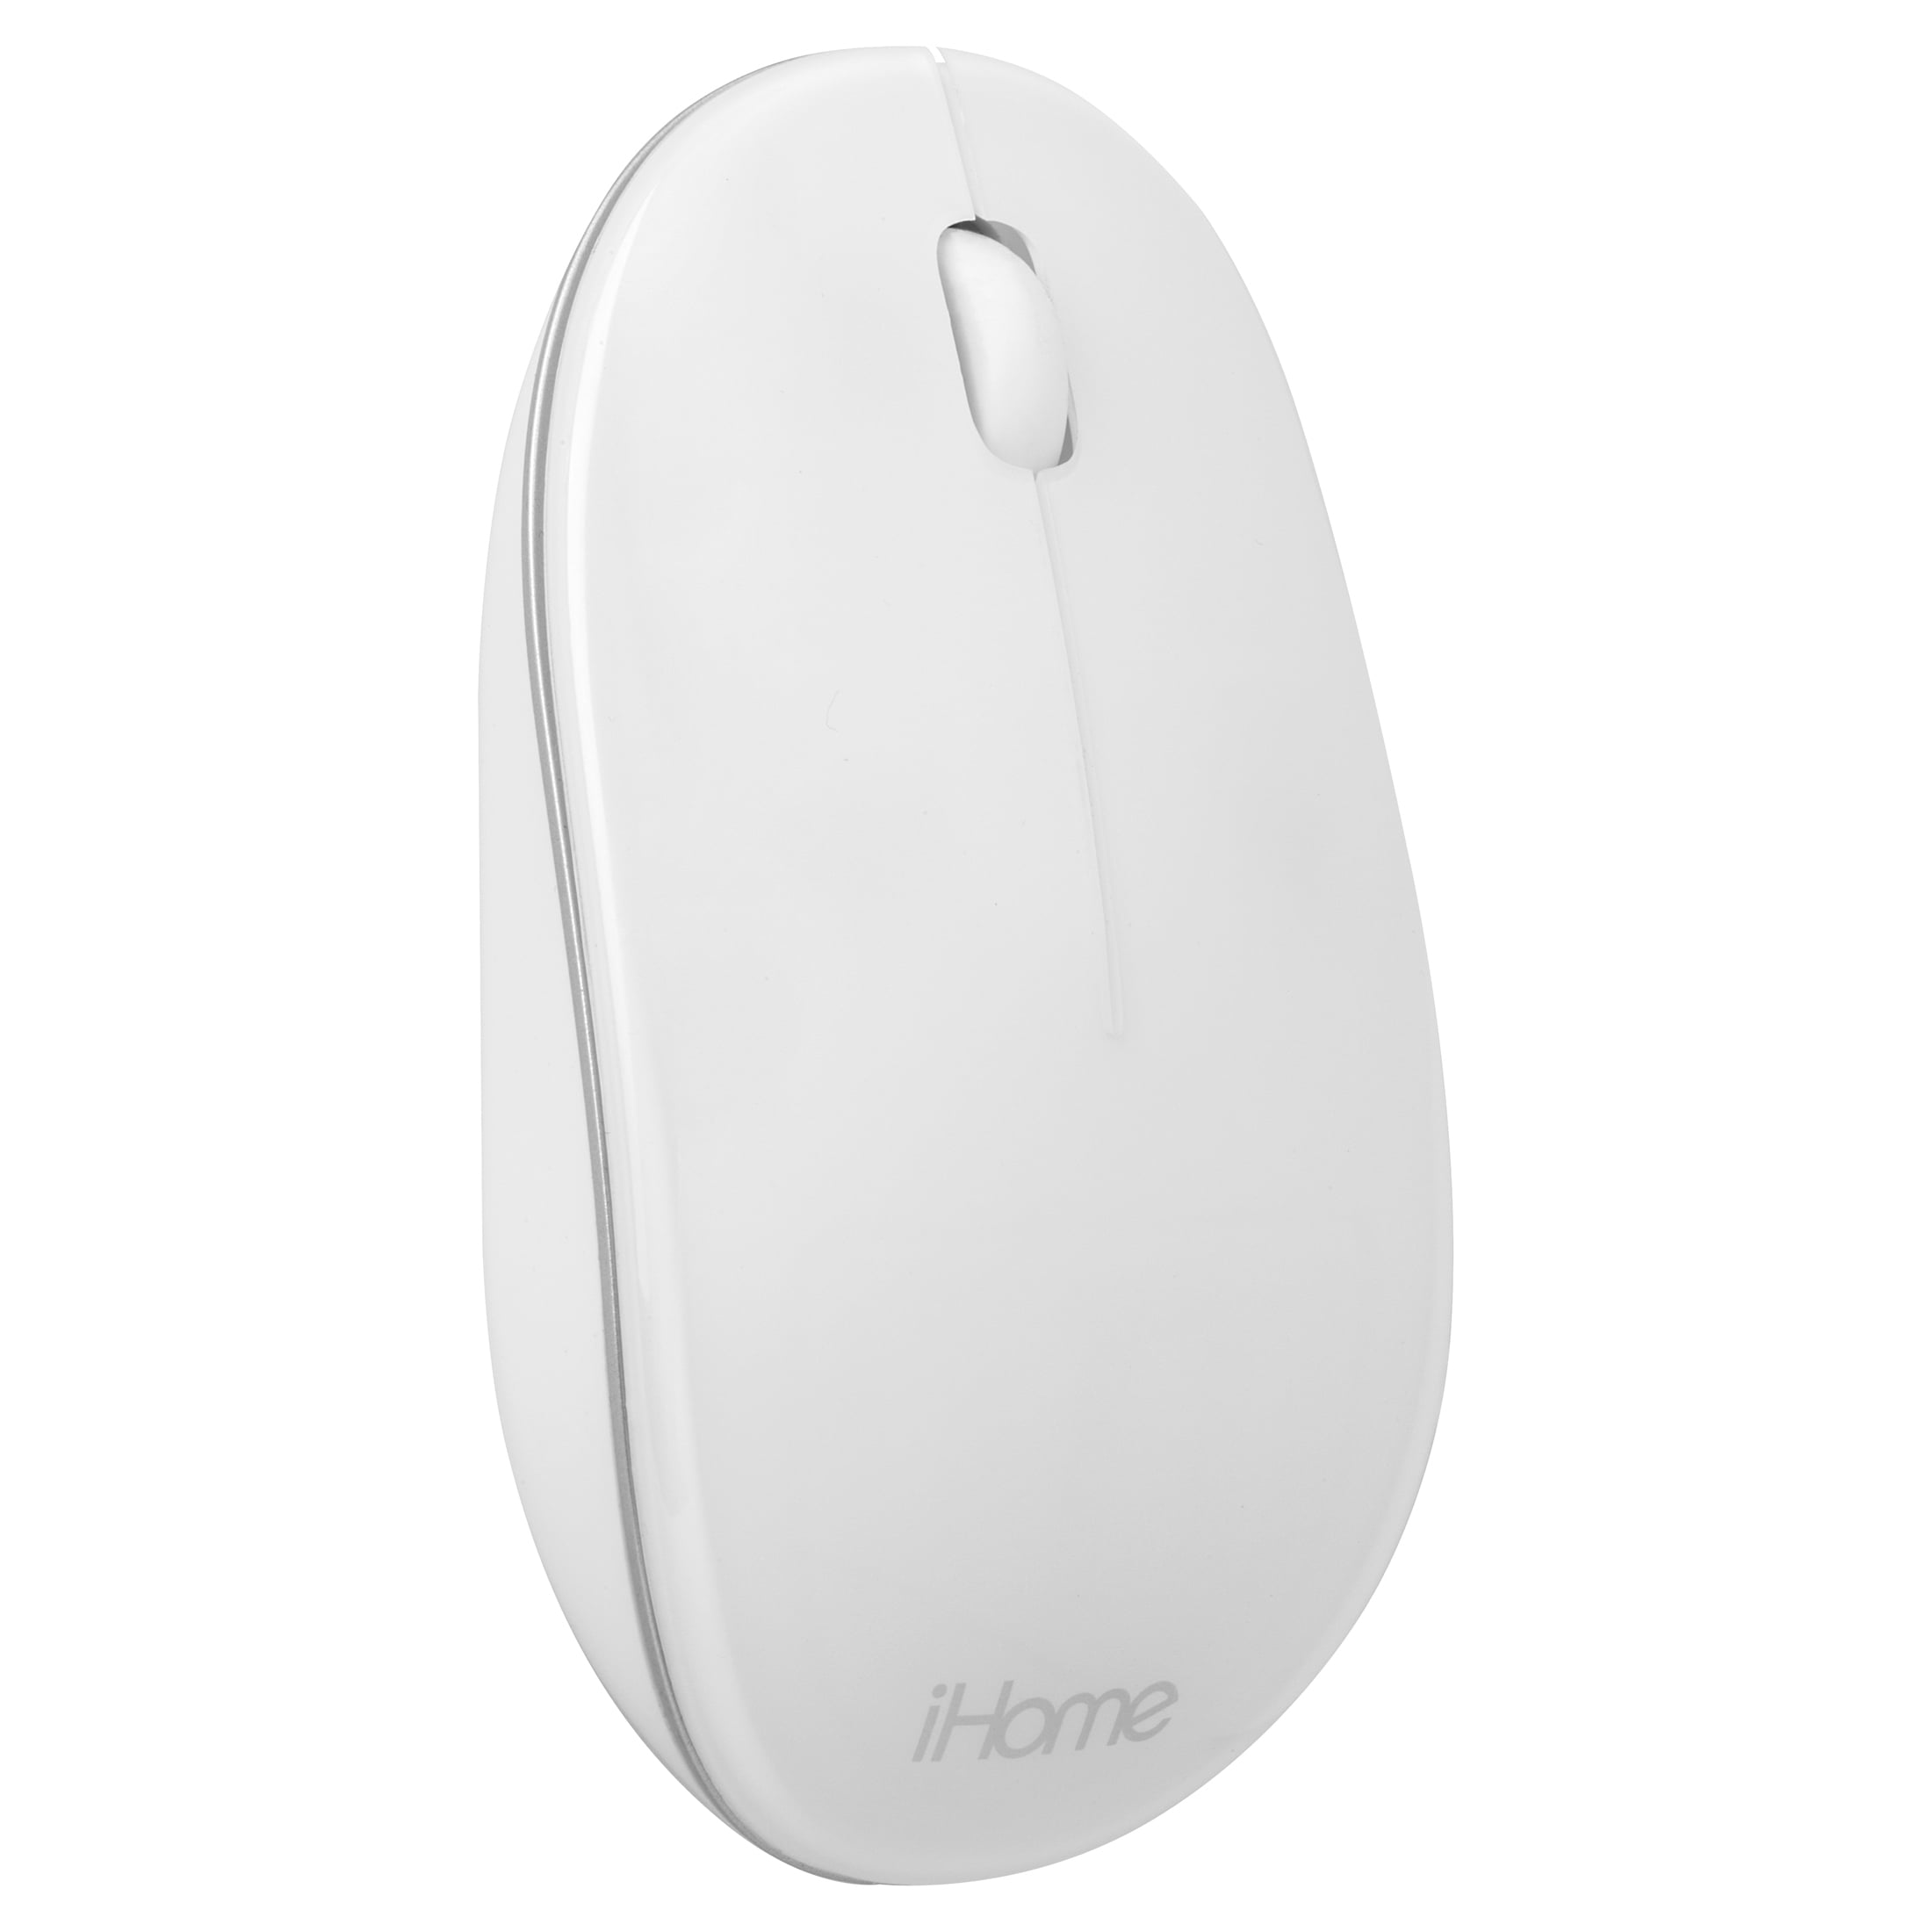 iHome Wireless Optical Mouse: Universal Mouse with USB-C & USB-A Adapter 